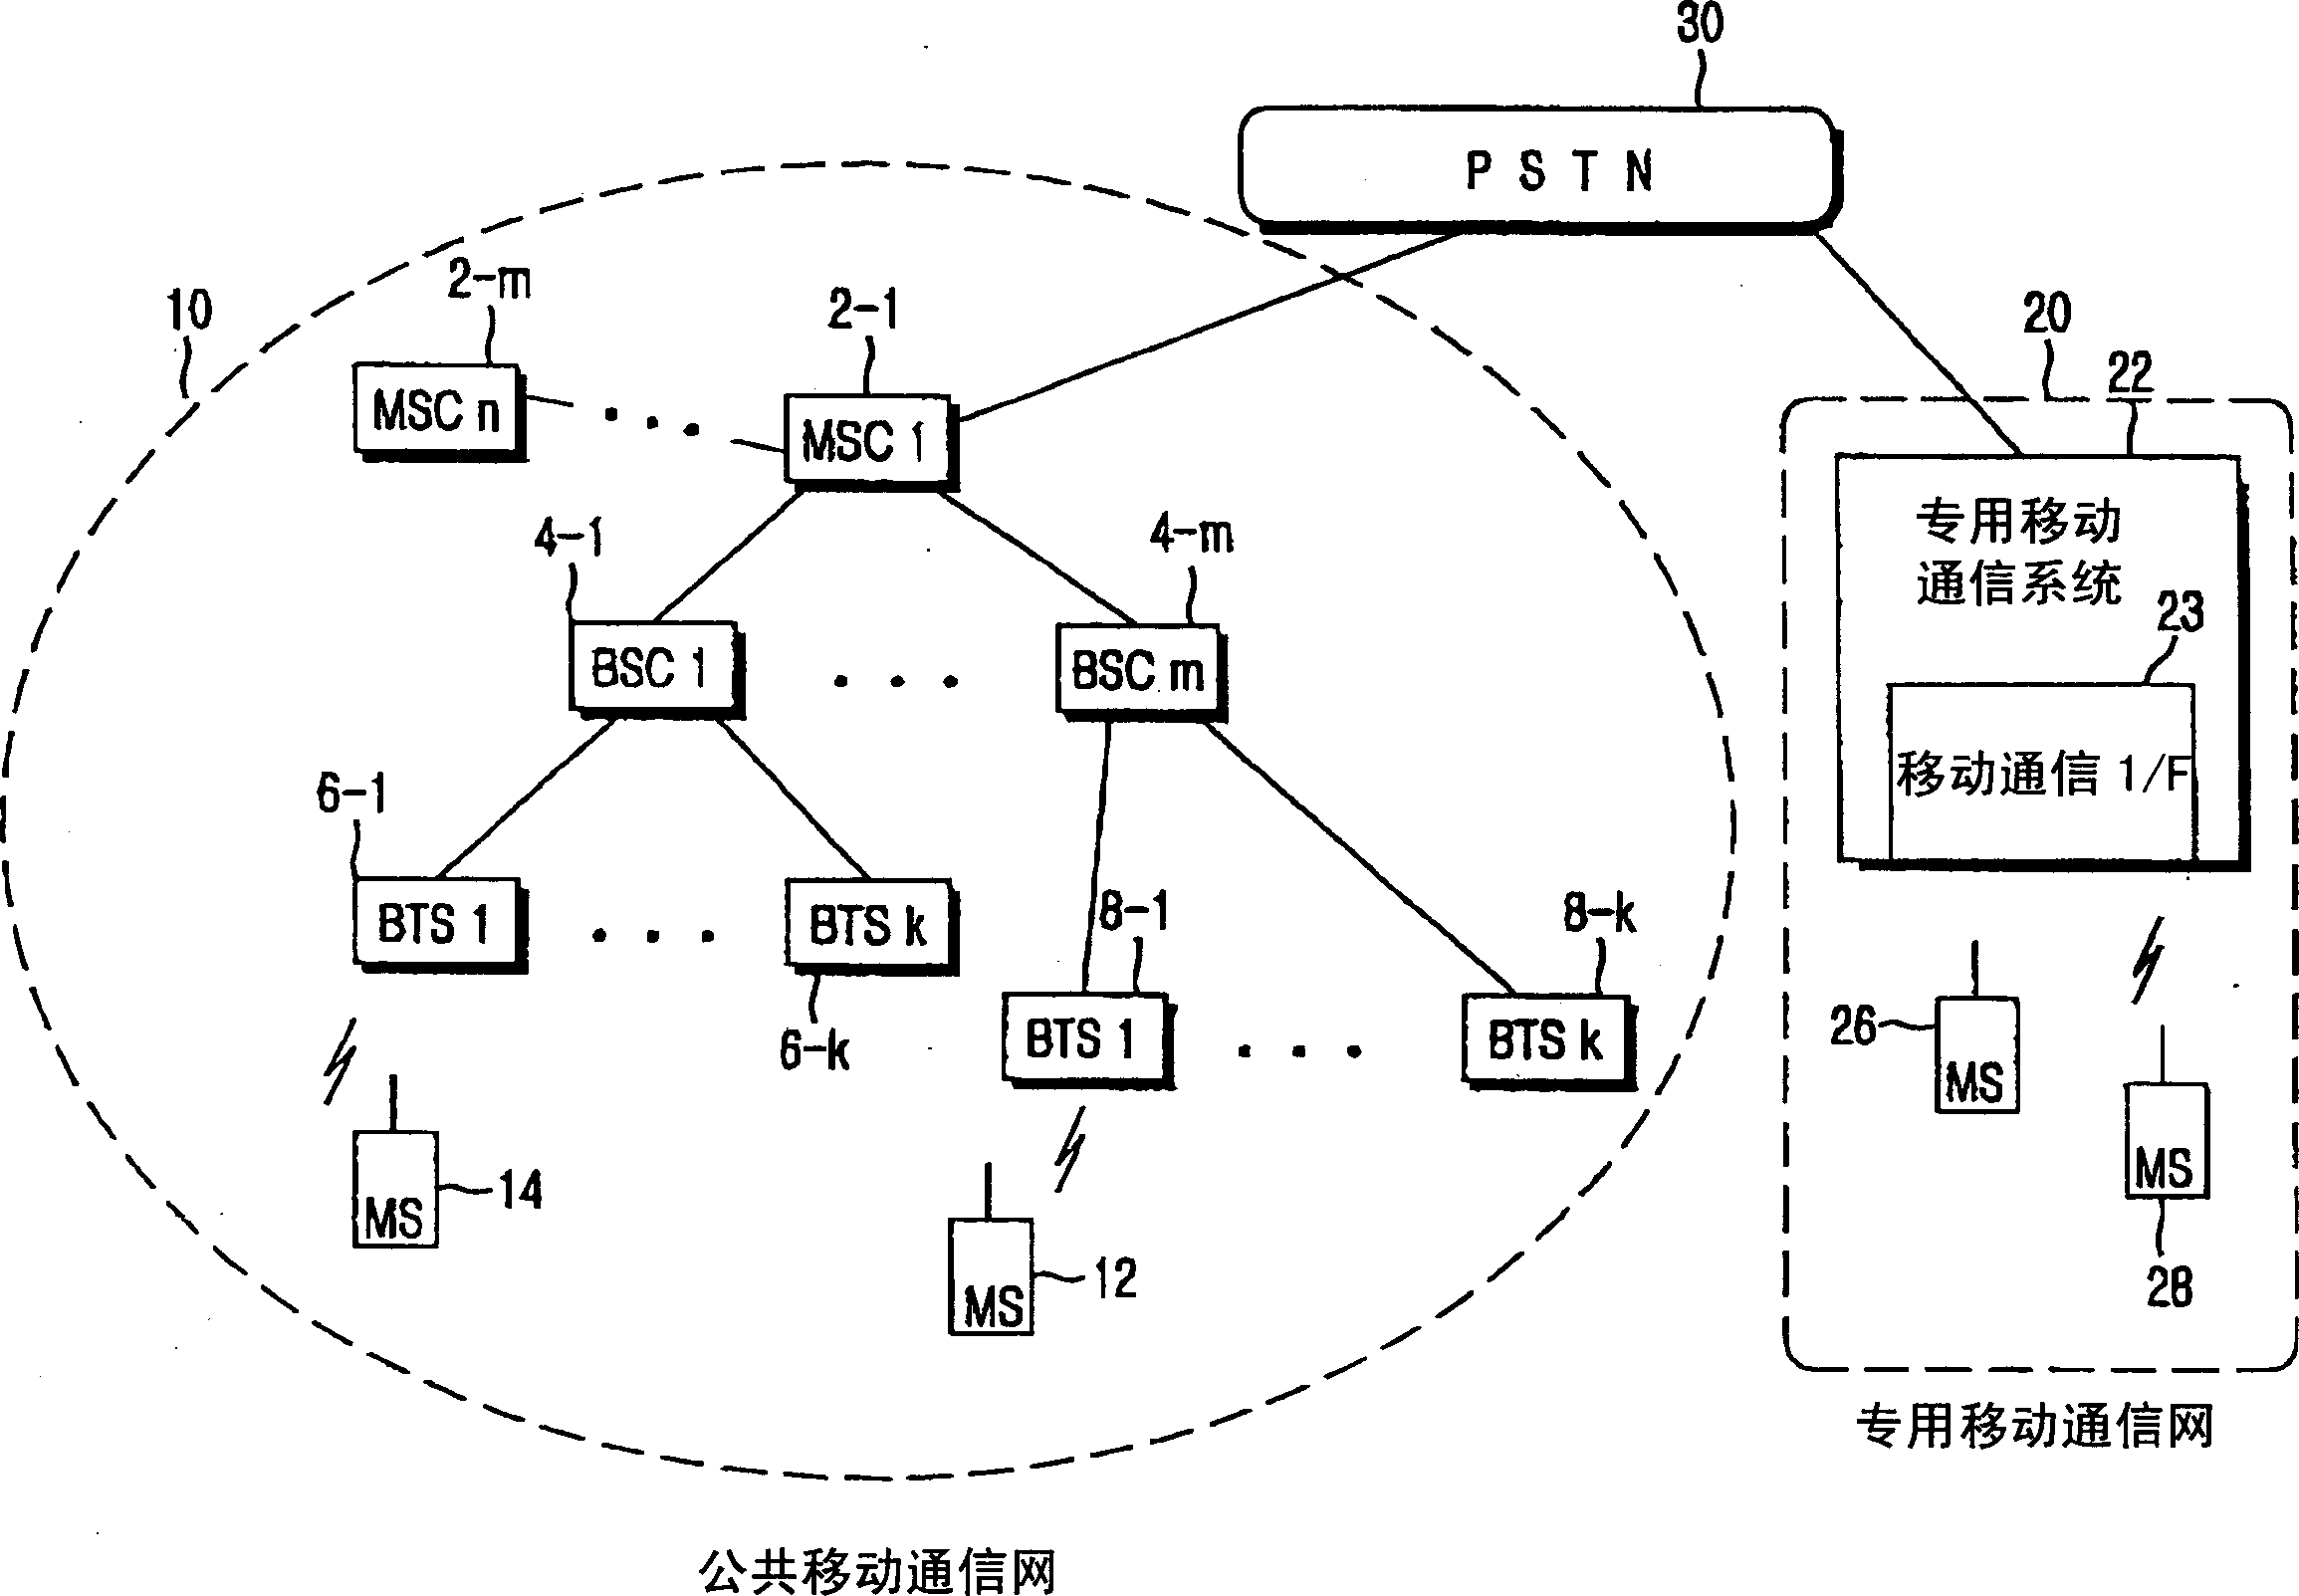 Service apparatus and method for pubilc mobile communication network, special line and mobile communication network